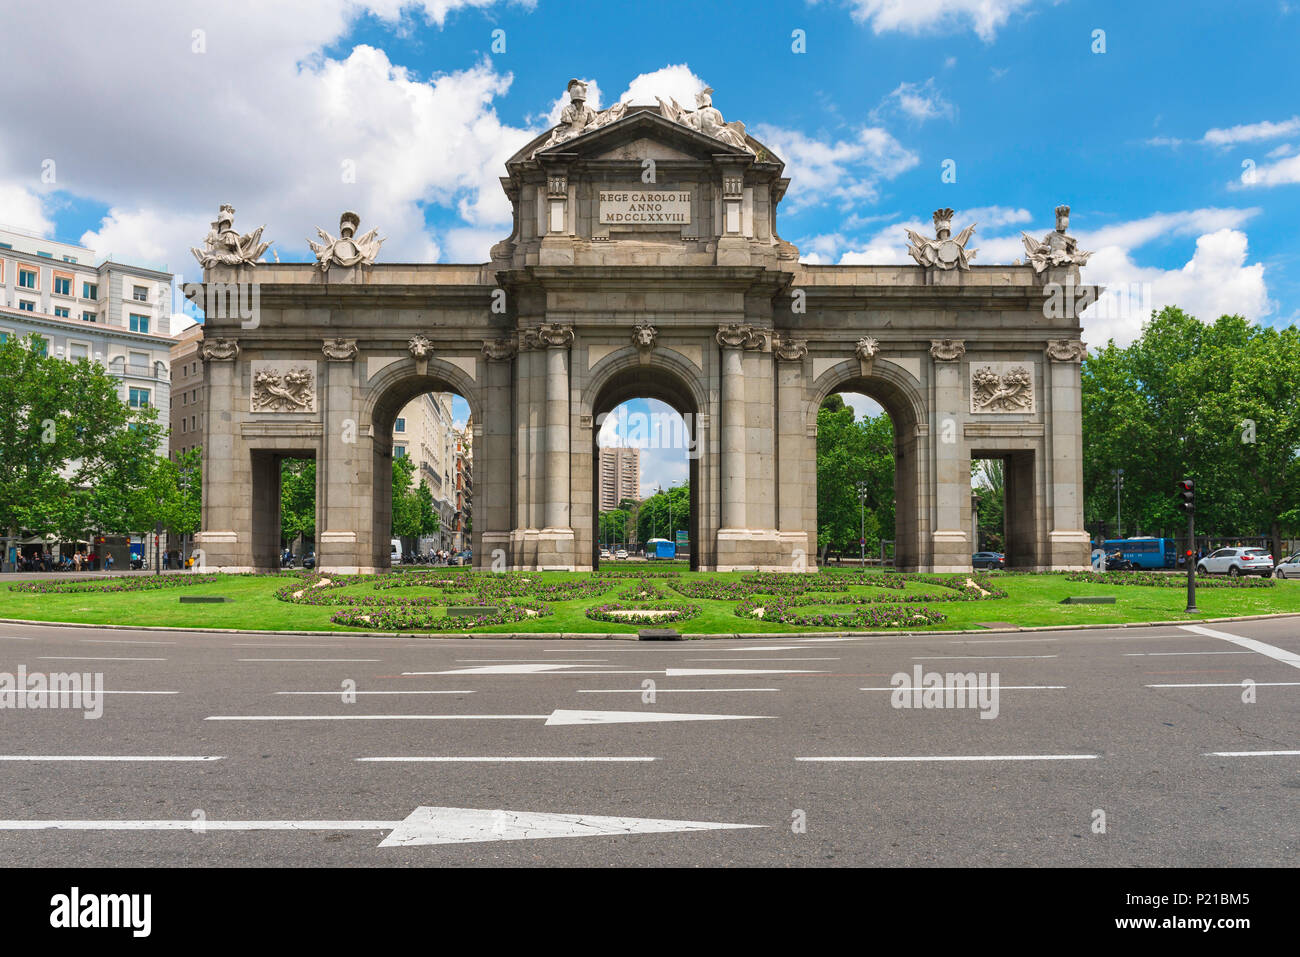 Plaza de la Independencia Madrid, view of the old city gate - the Puerta  Alcala - in the Plaza de la Independencia, Madrid, Spain Stock Photo - Alamy